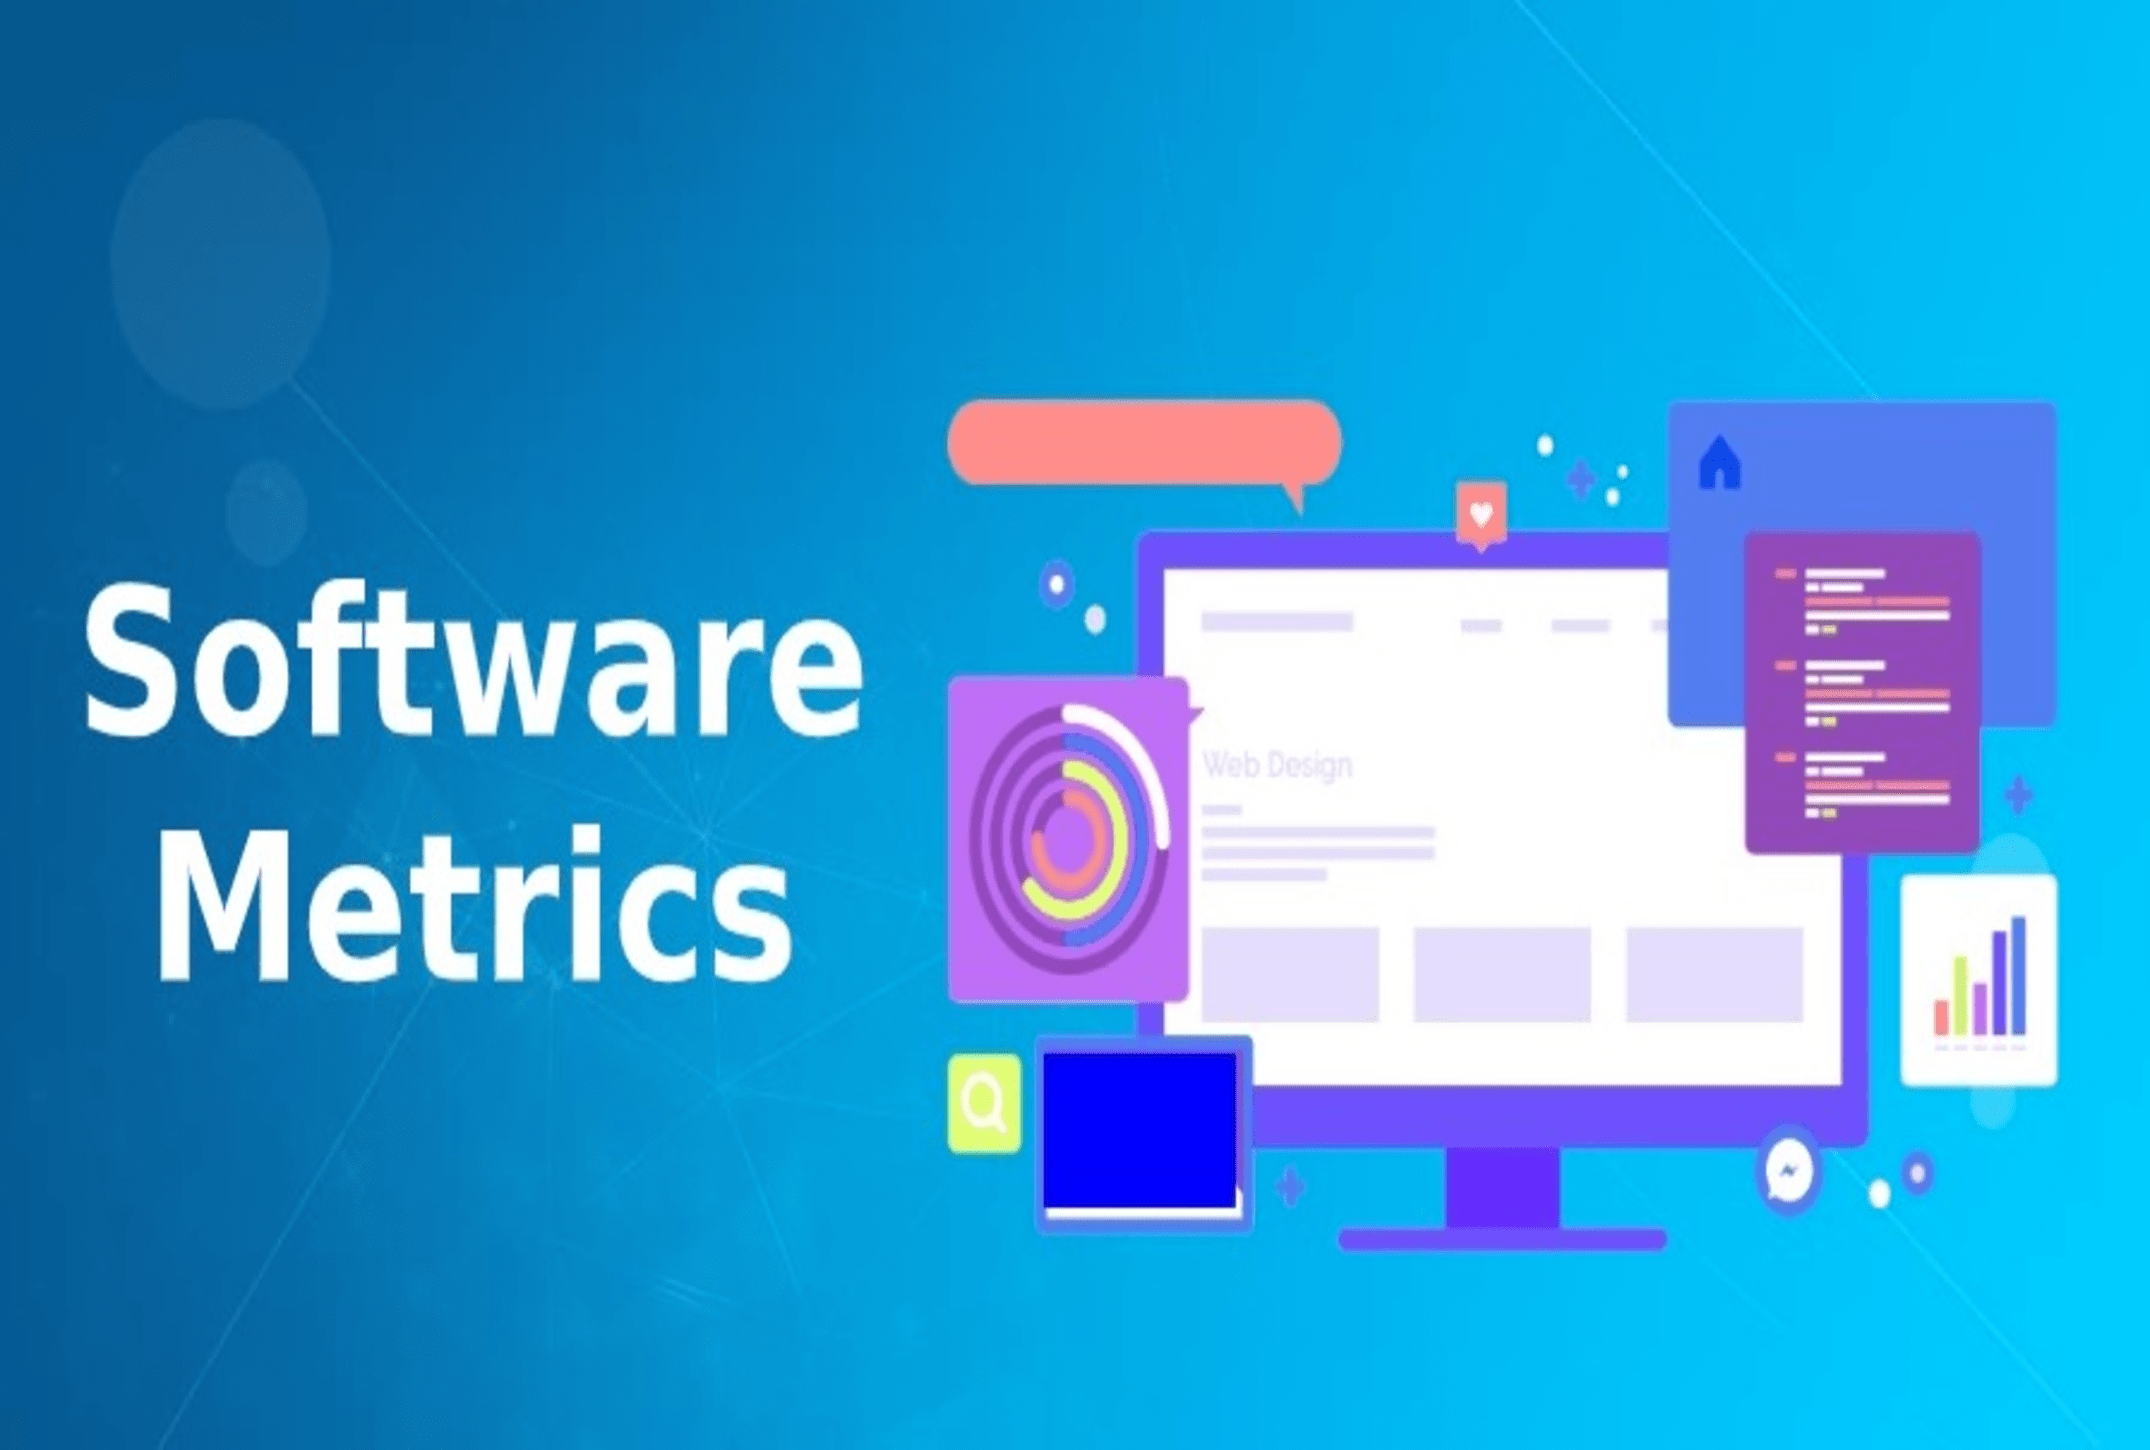 Software Metrics for your Product Development